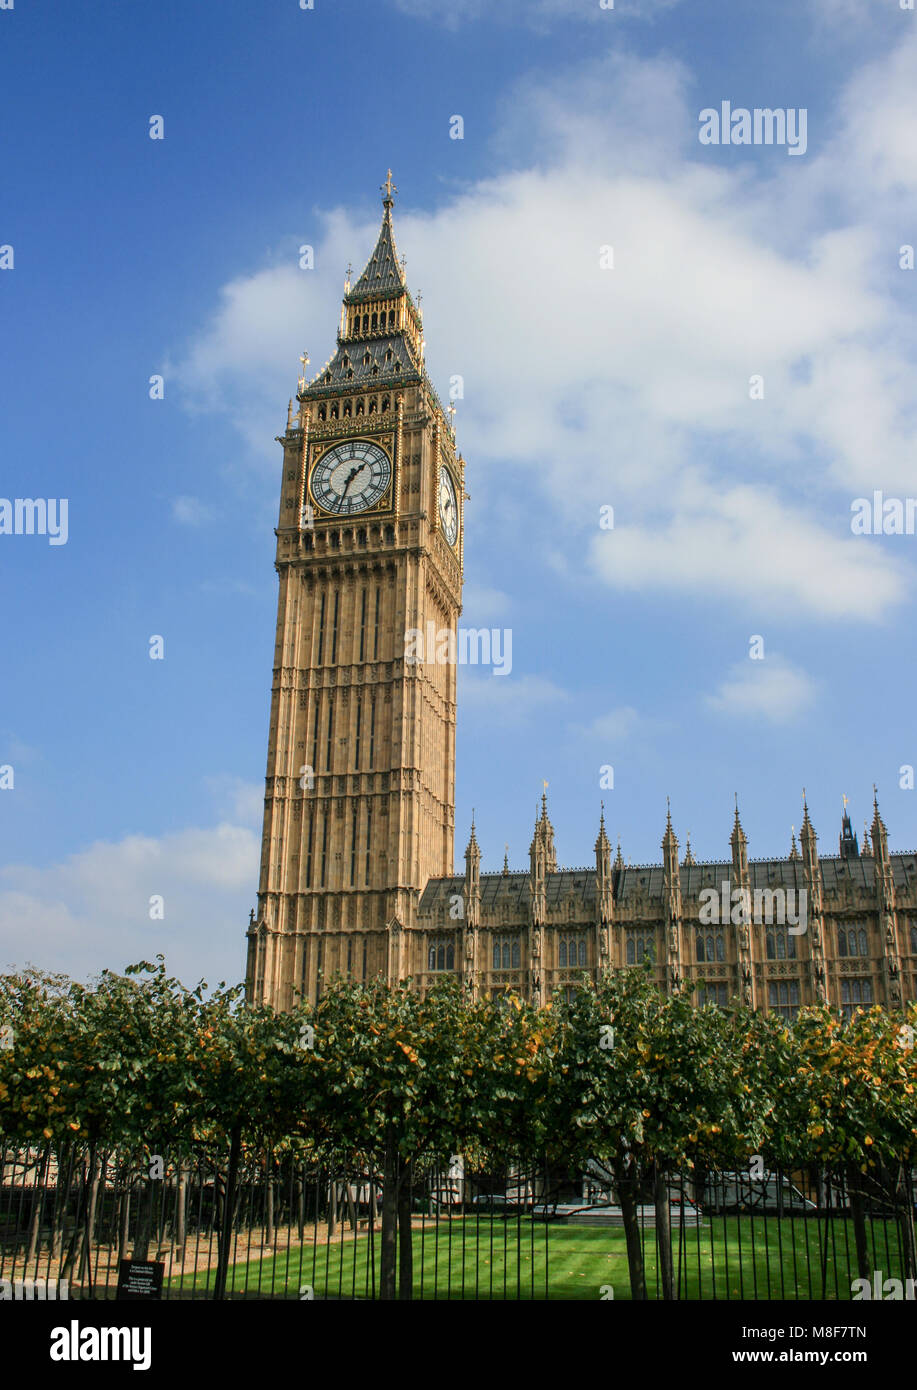 Big Ben (the Great Bell) at the Palace of Westminster, London, UK Stock Photo